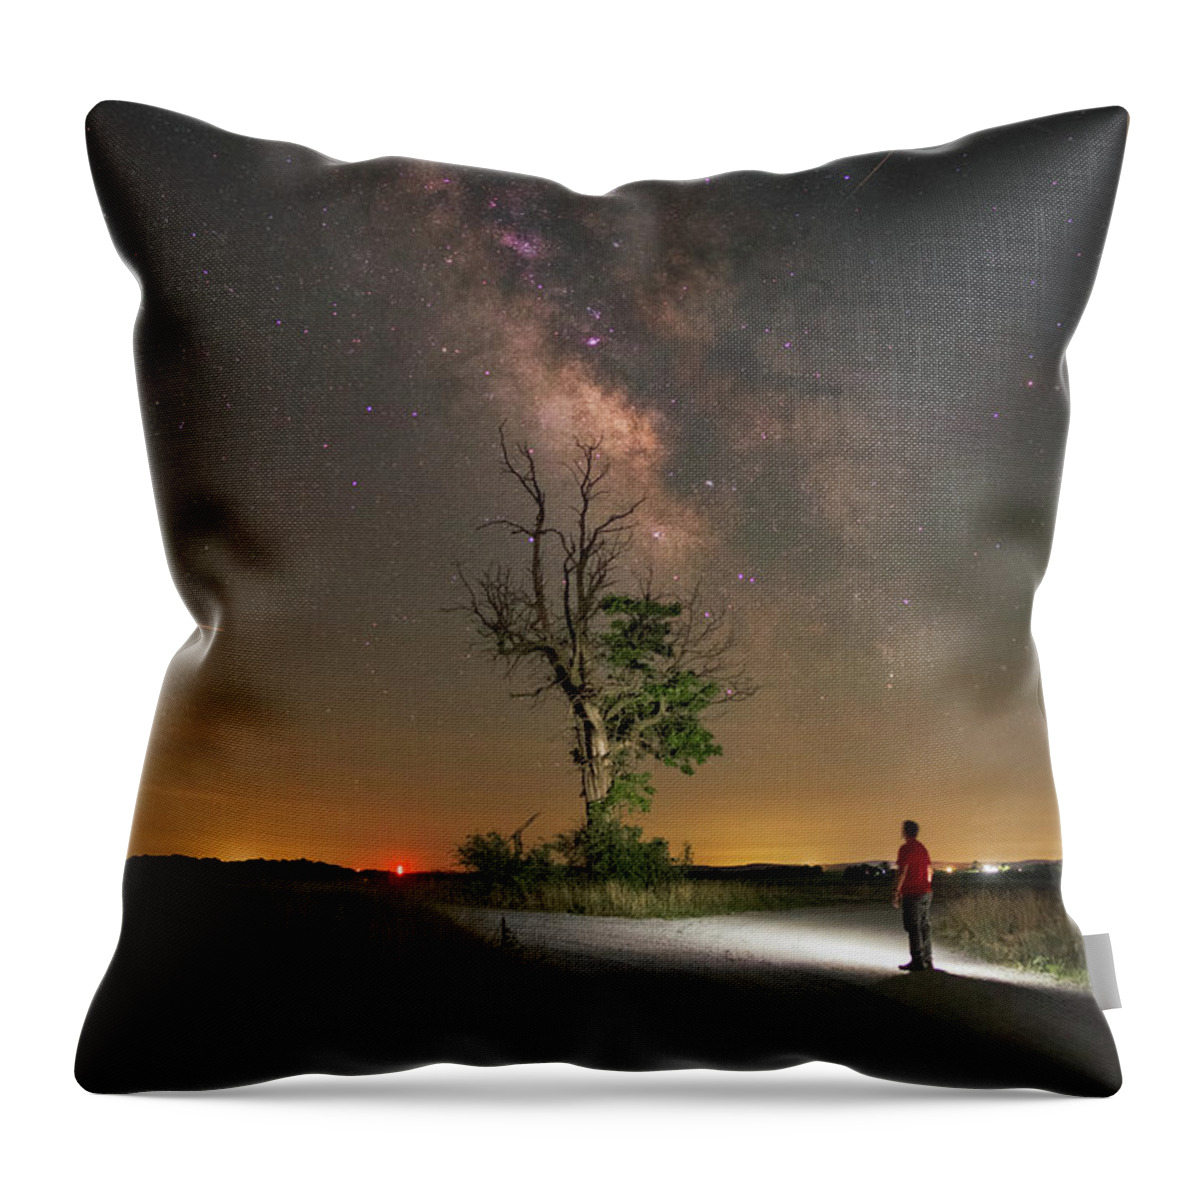 Nightscape Throw Pillow featuring the photograph Reaching by Grant Twiss